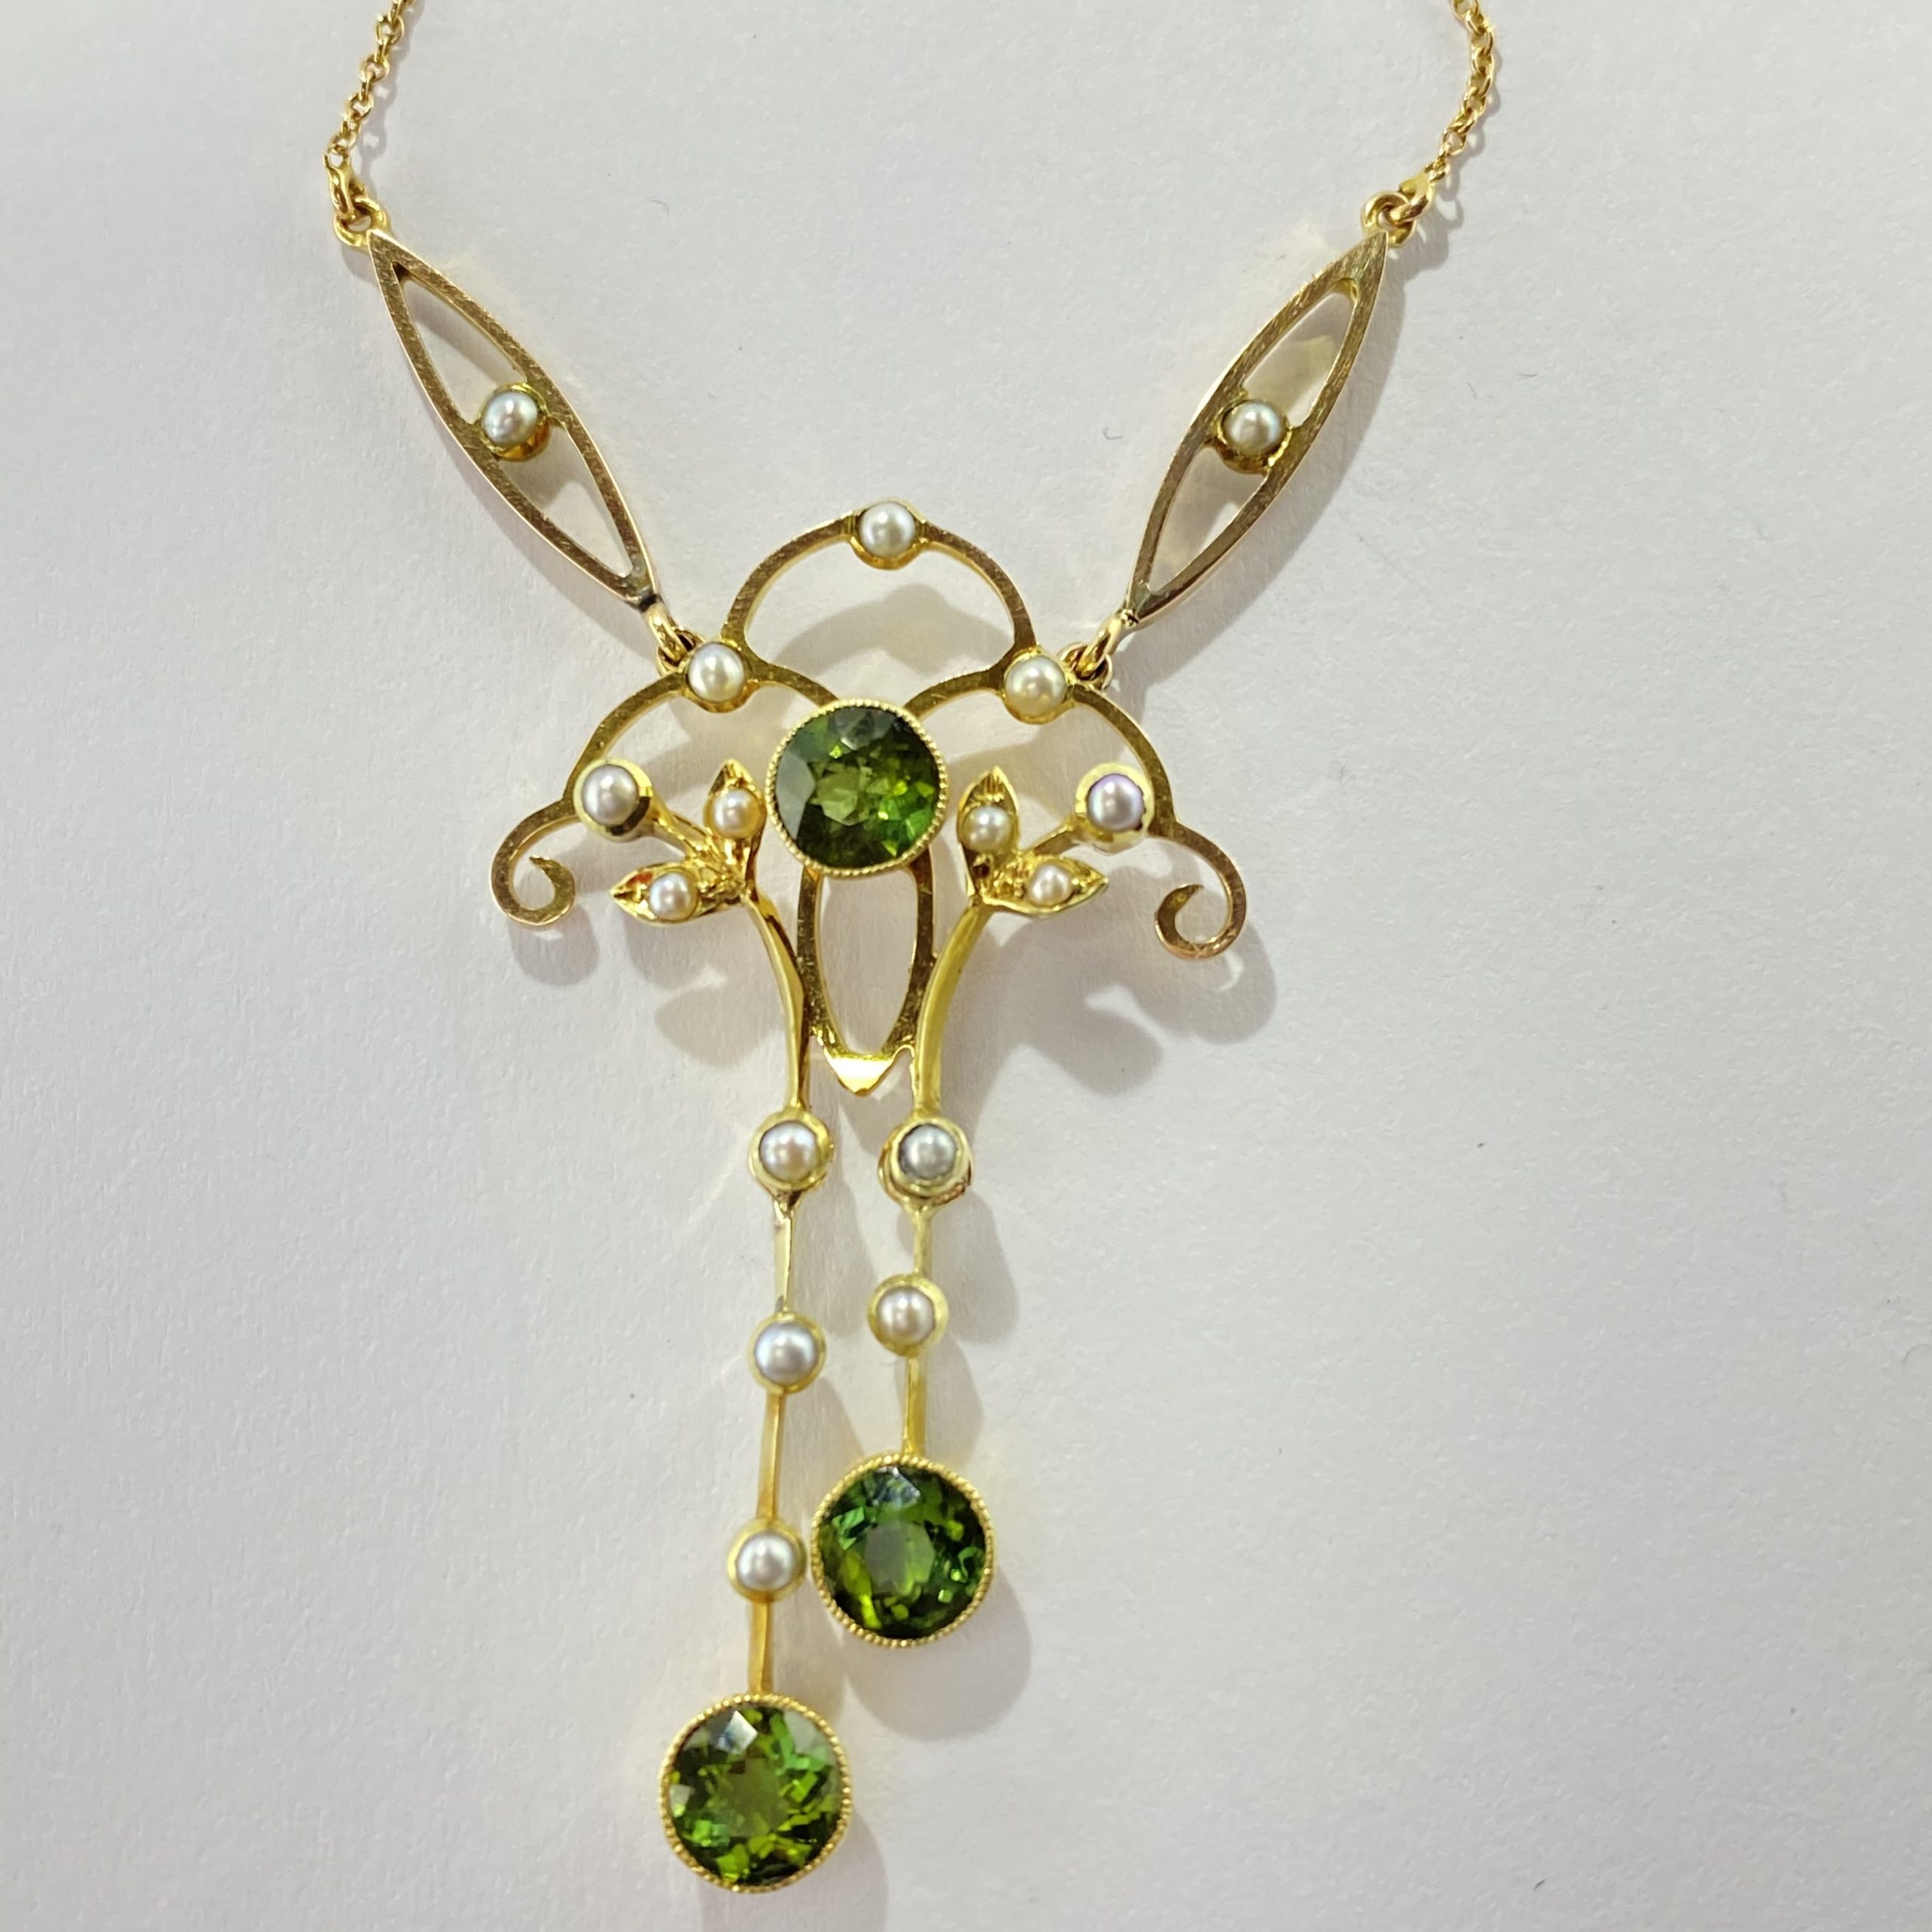 Antique Peridot, Diamond and Pearl Necklace